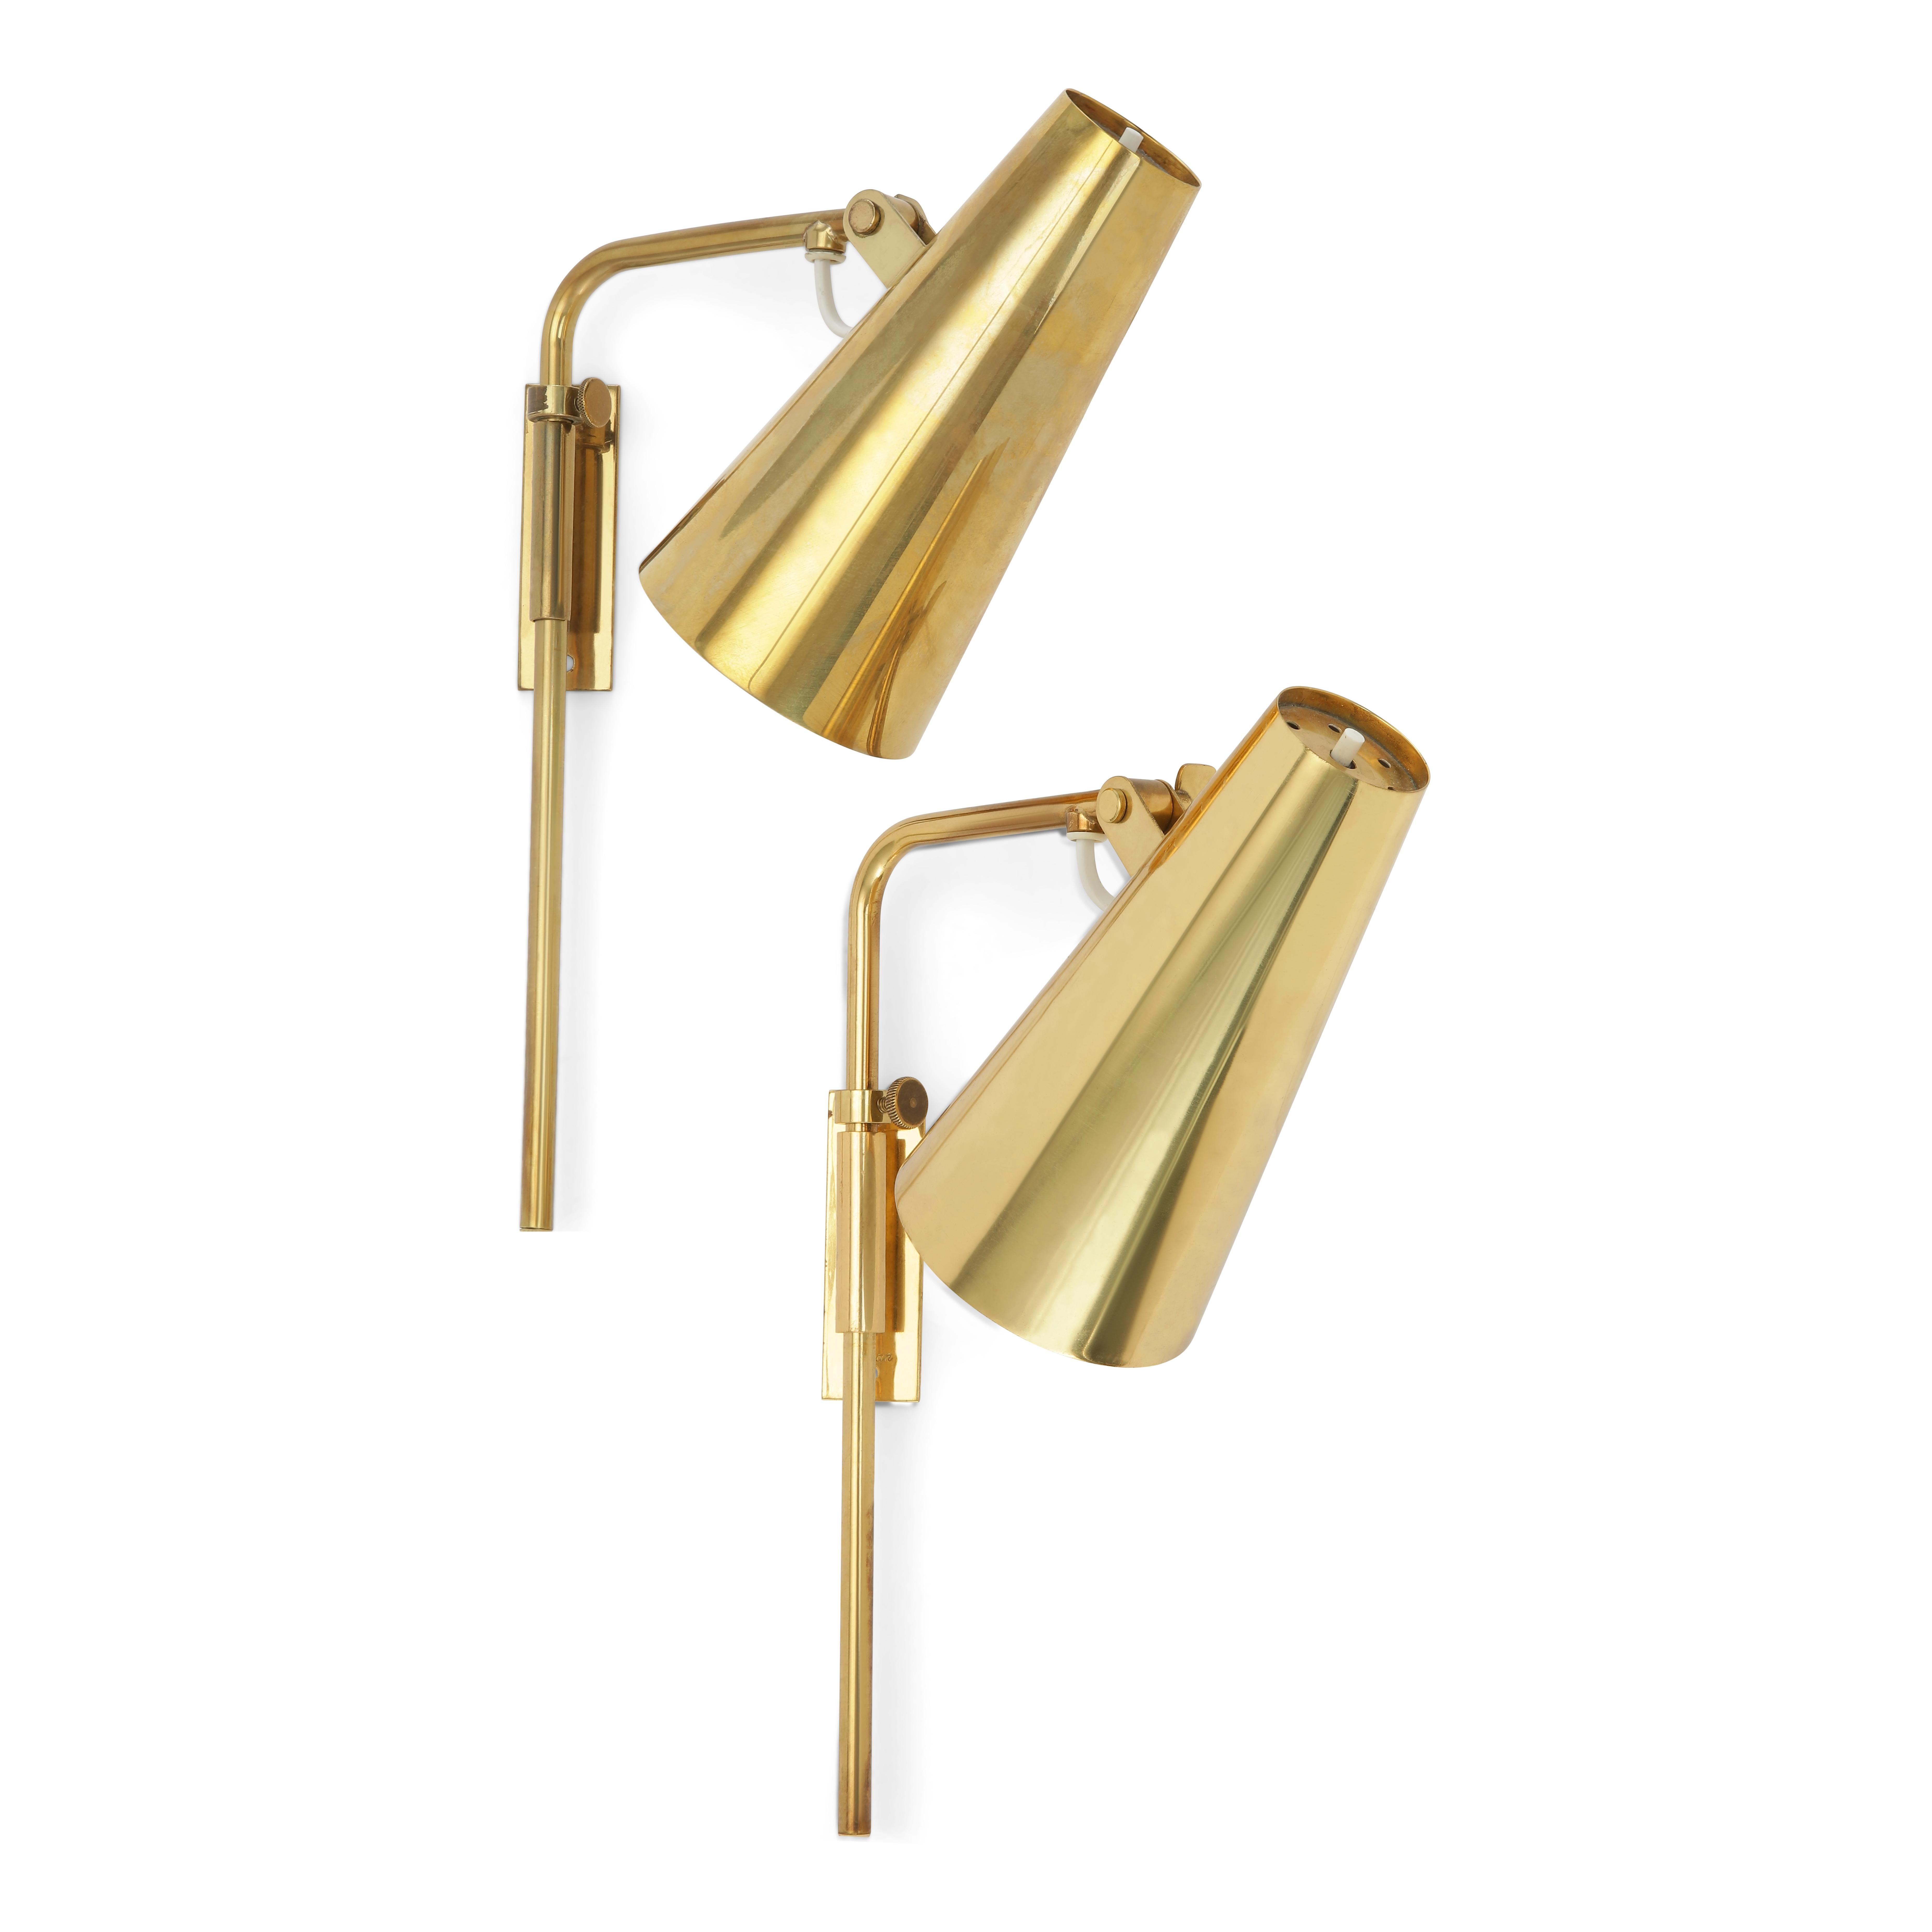 Finnish Pair of Paavo Tynell Brass Wall Lights for Taito Oy, Finland, 1950s